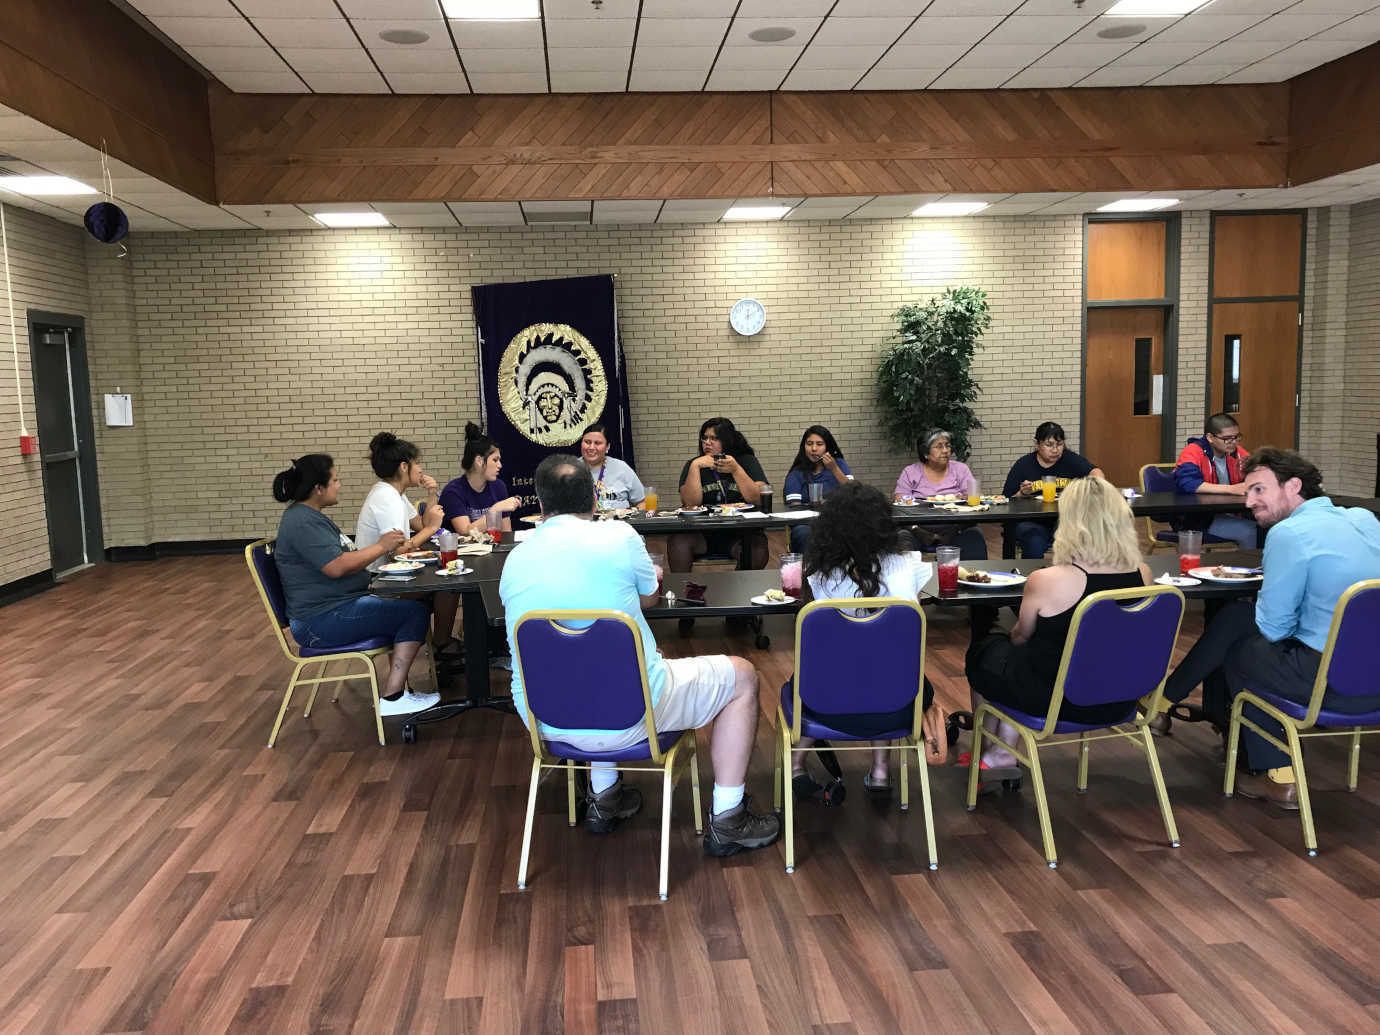 Participants in the Summer Bridge program connect with one another over a meal in between lessons. Photo courtesy of Haskell Indian Nations University.